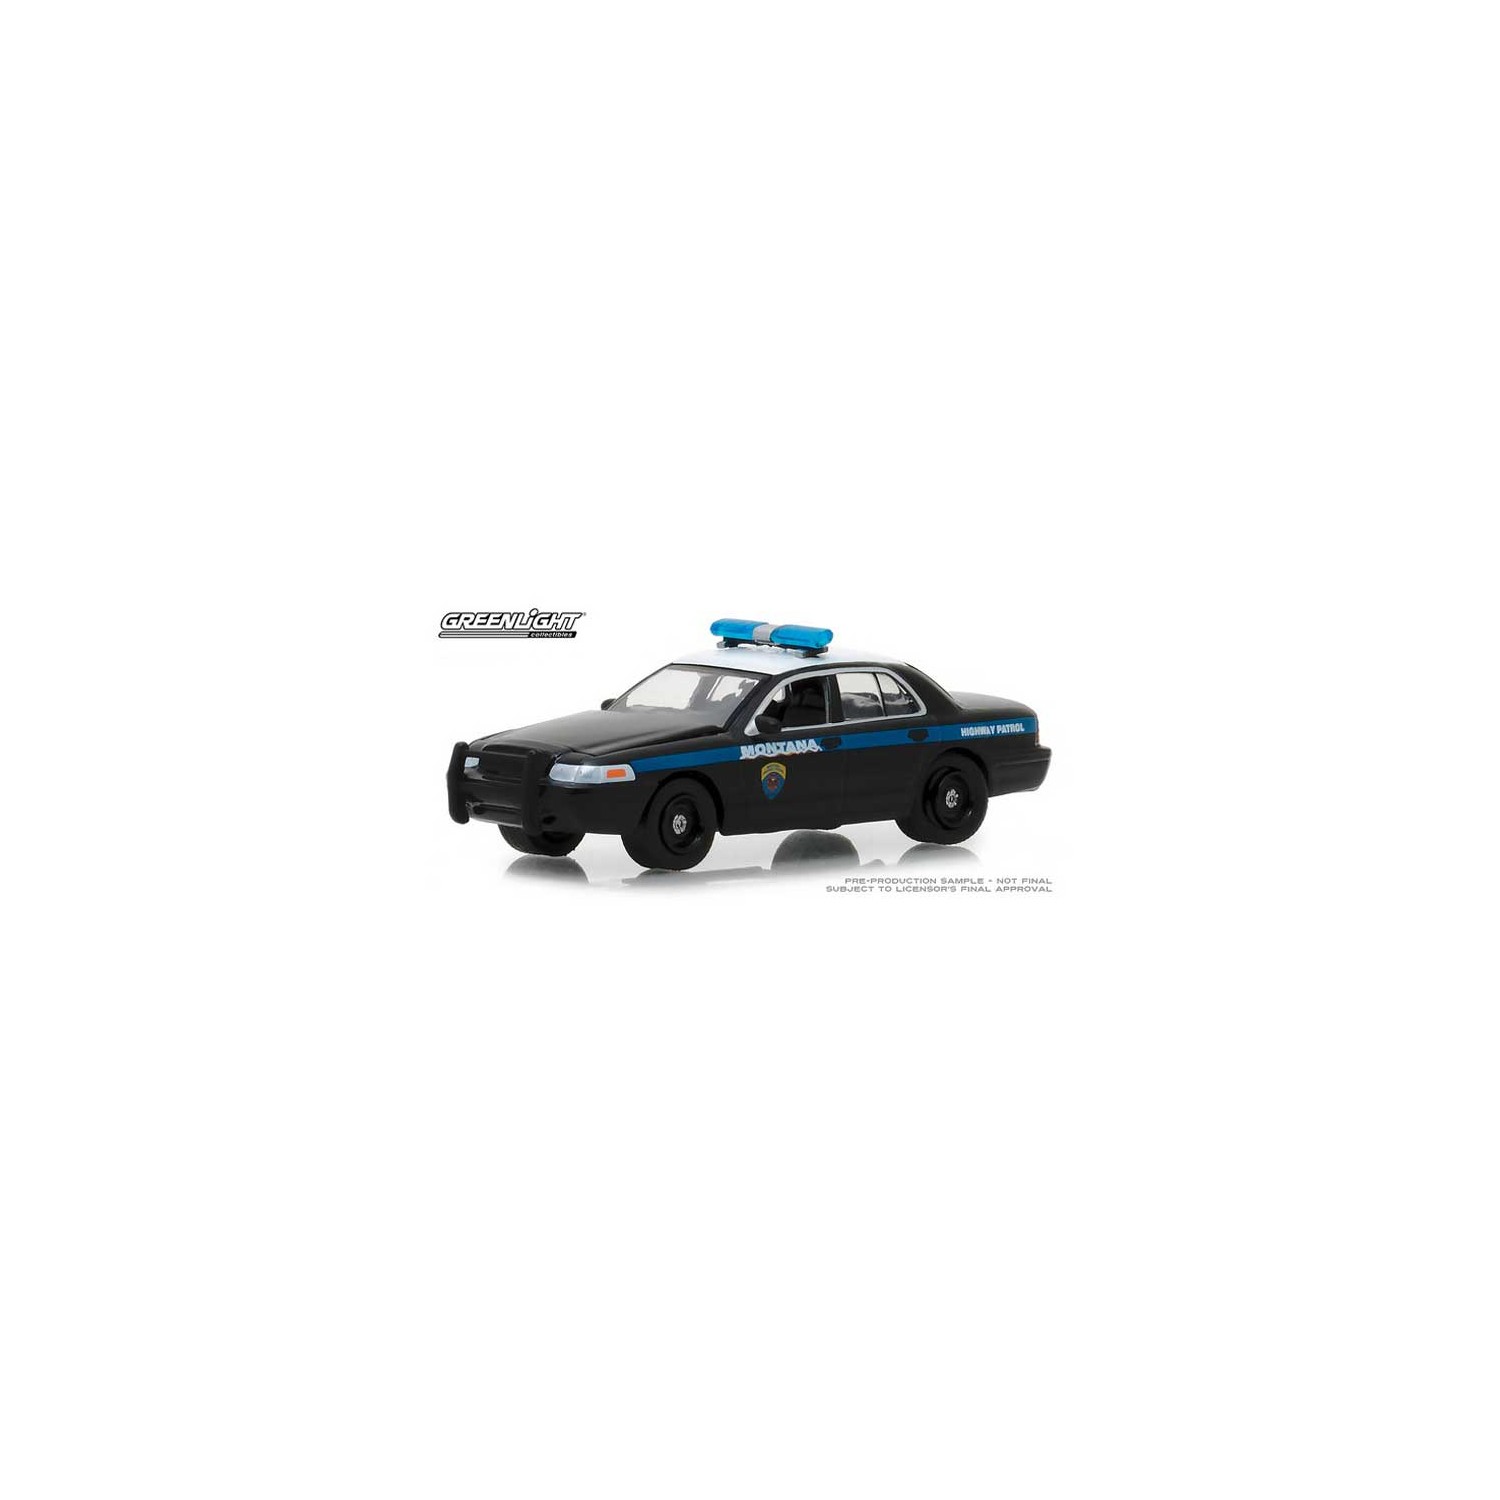 Greenlight Hot Pursuit Series 29 - 2001 Ford Crown Victoria Police Car